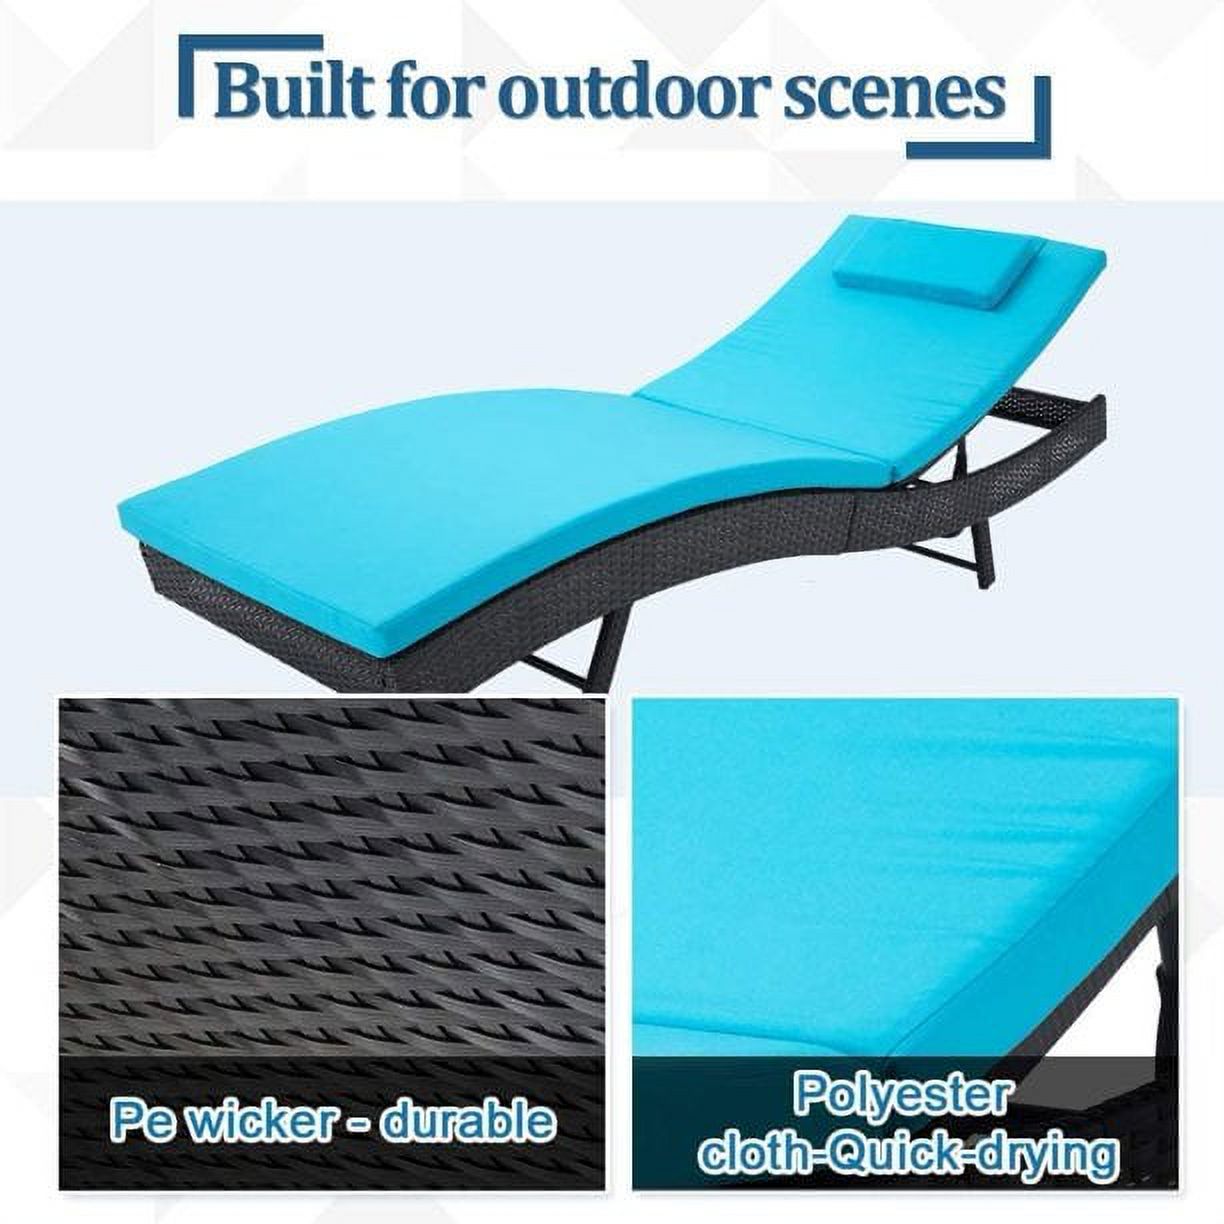 SOLAURA Patio Chaise Lounge Adjustable Black Wicker Reclining Chairs Set of 2 with Blue Cushions - image 5 of 6